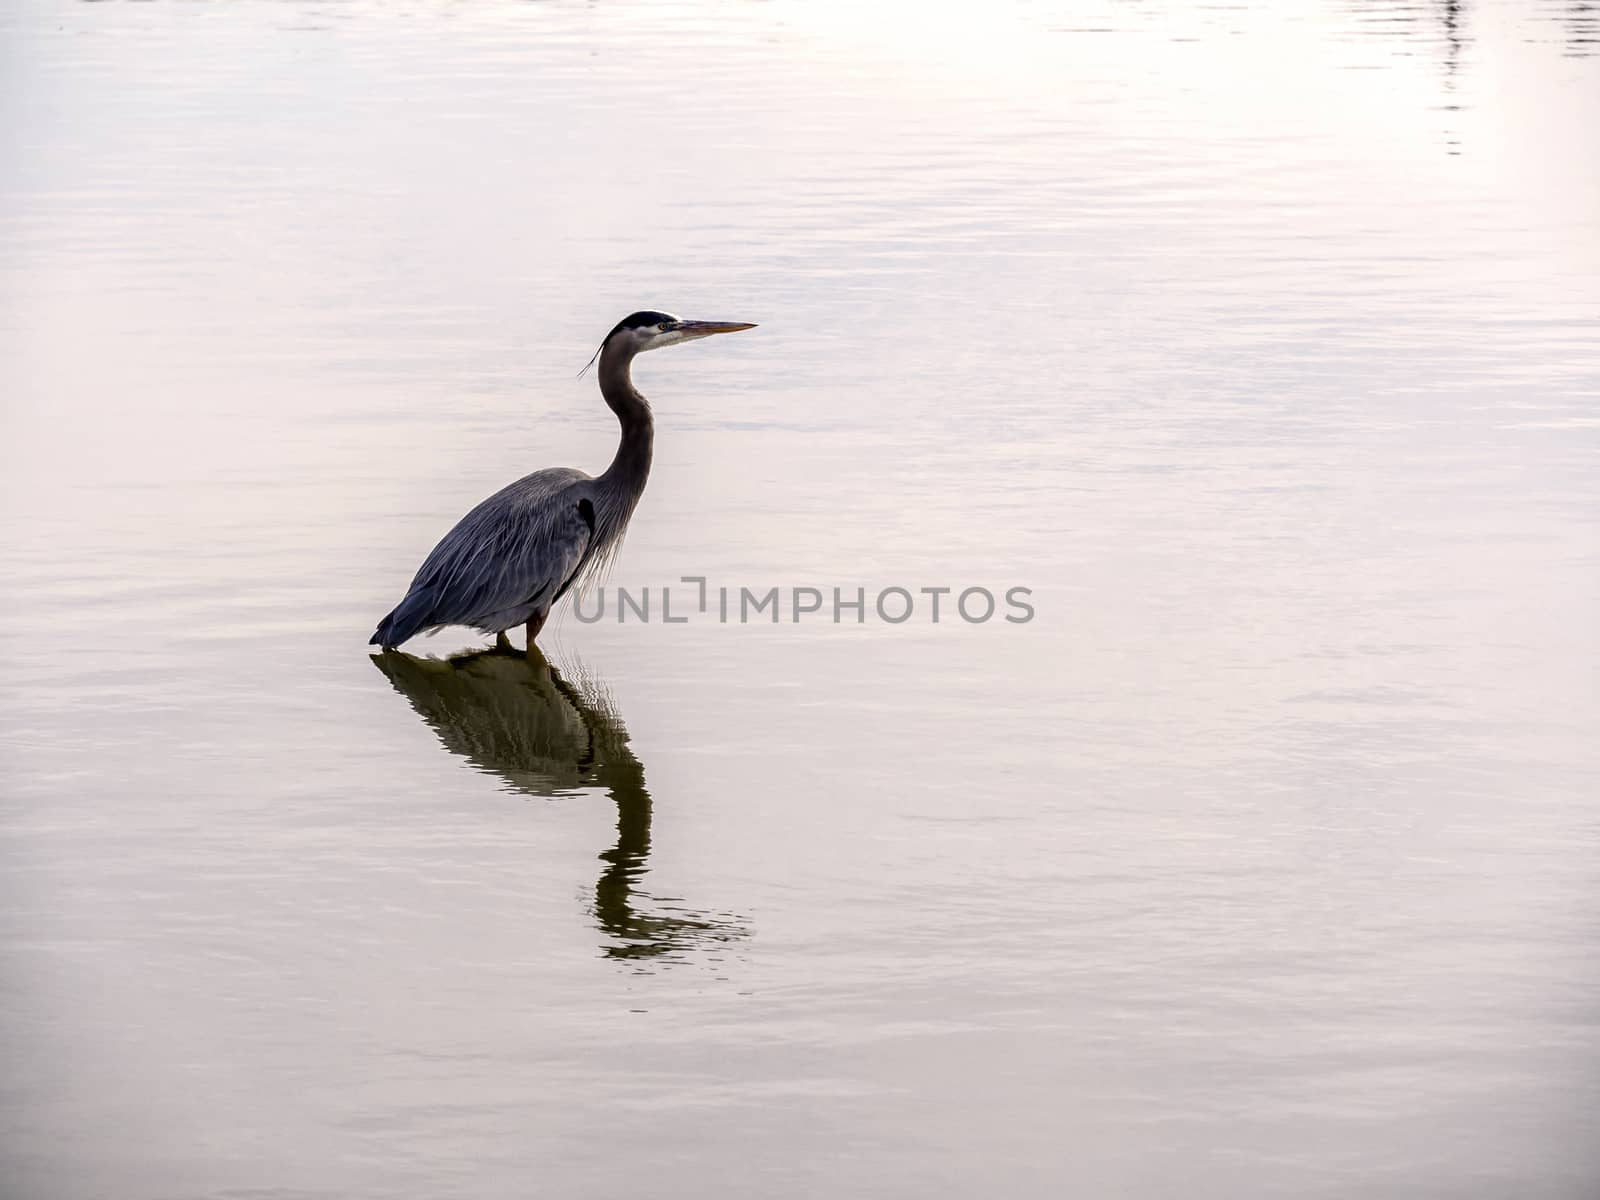 Heron waiting for prey by leieng